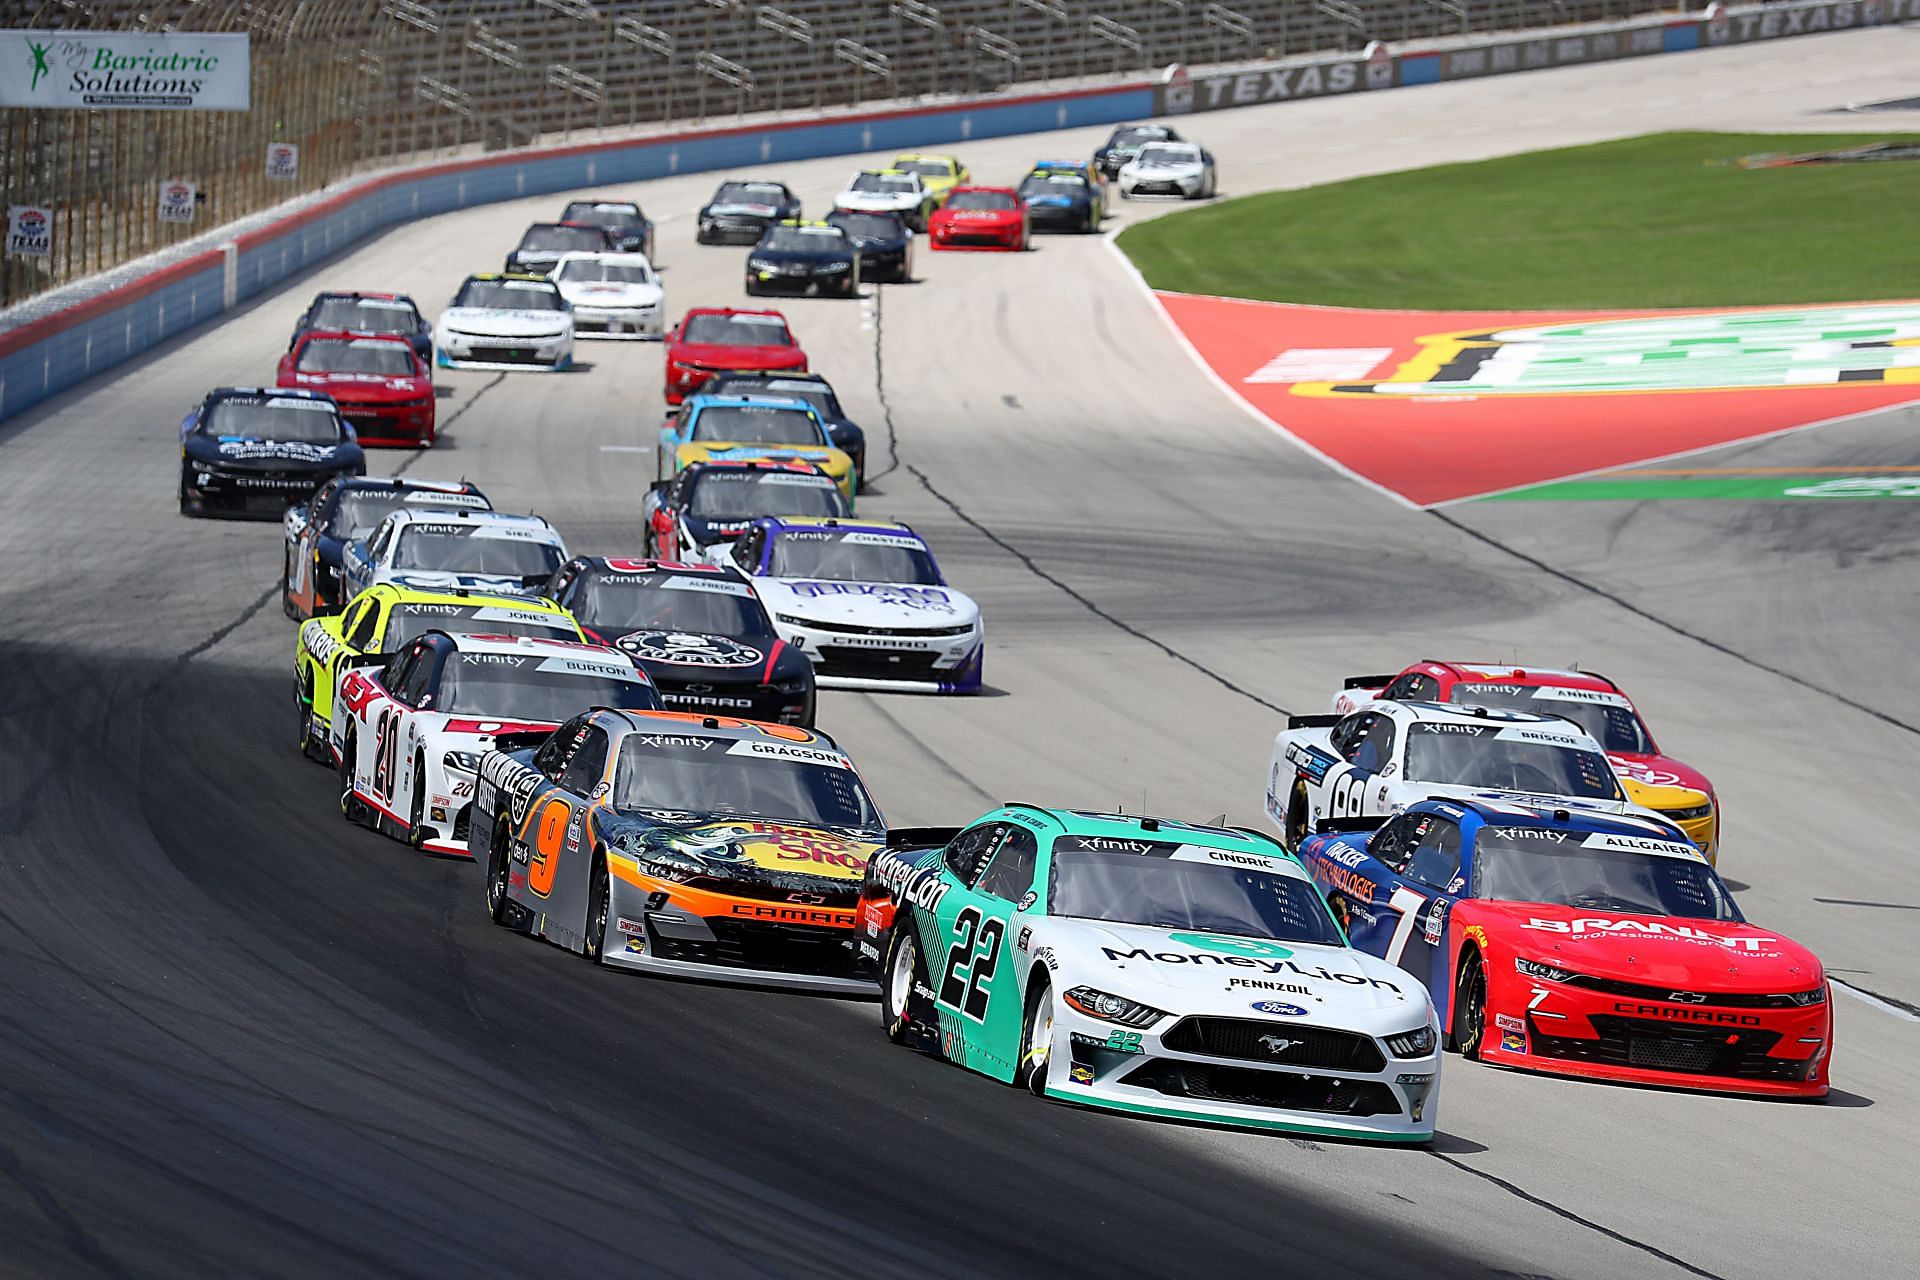 NASCAR opts against using resin at Texas Motor Speedway ahead of